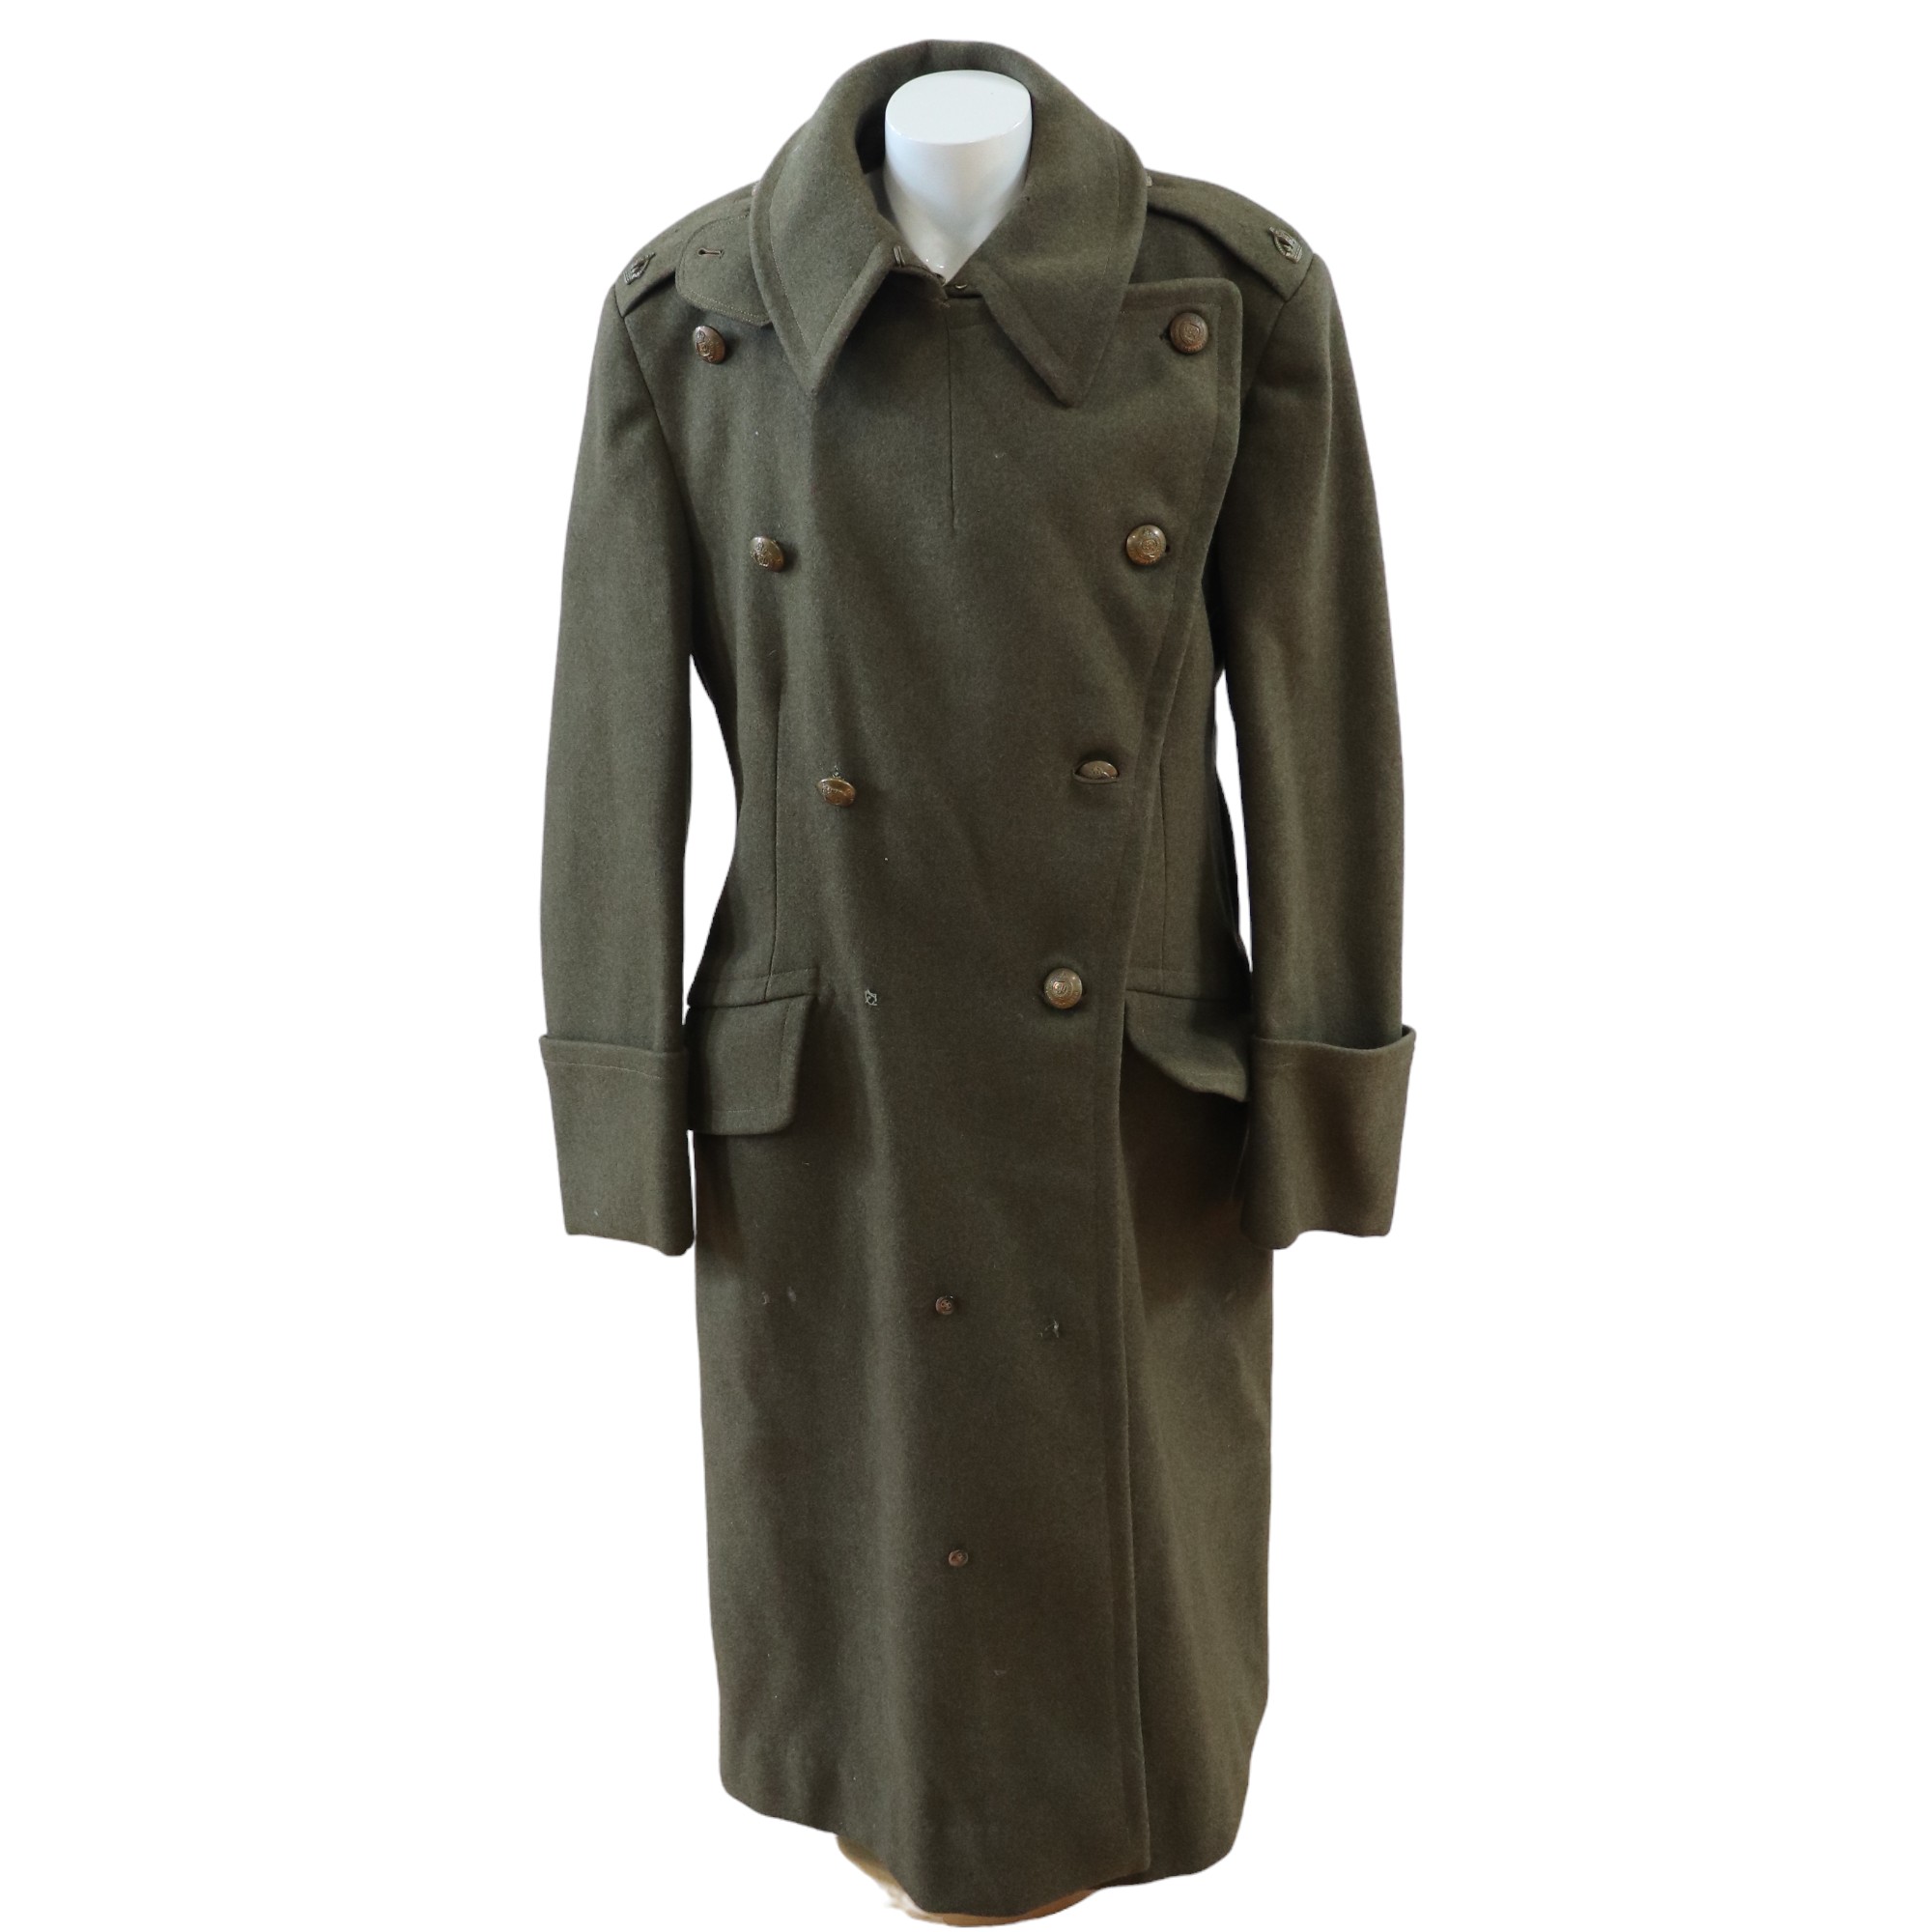 A 1943 dated army officer's greatcoat